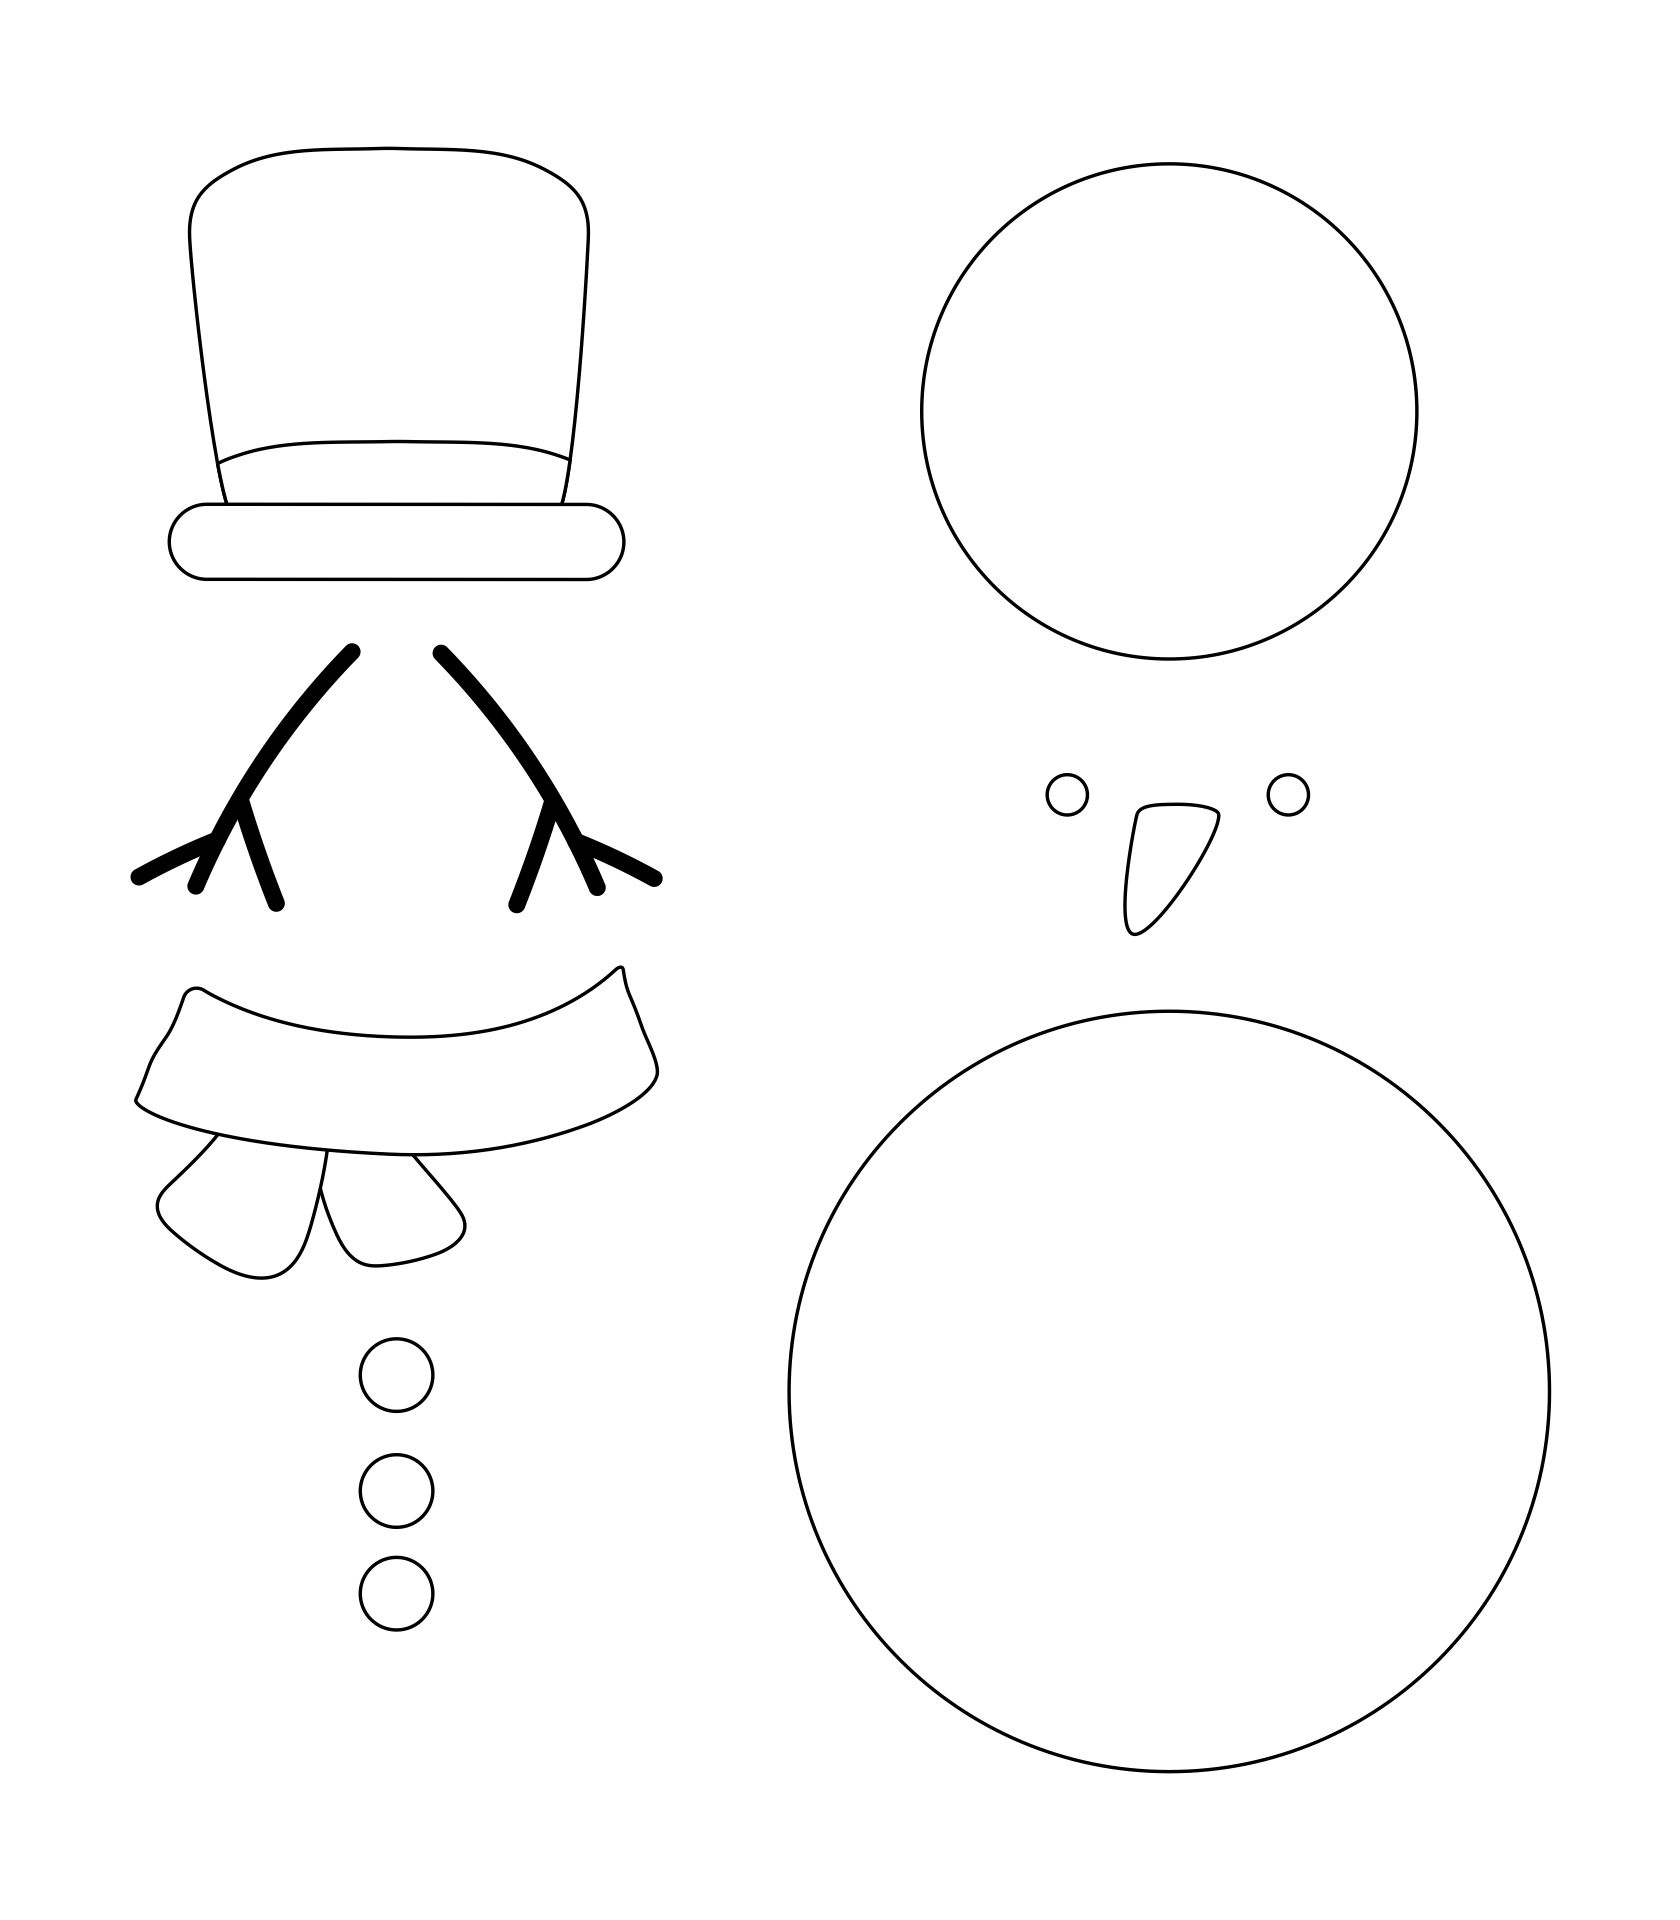 6-best-images-of-printable-snowman-cut-out-pattern-printable-snowman